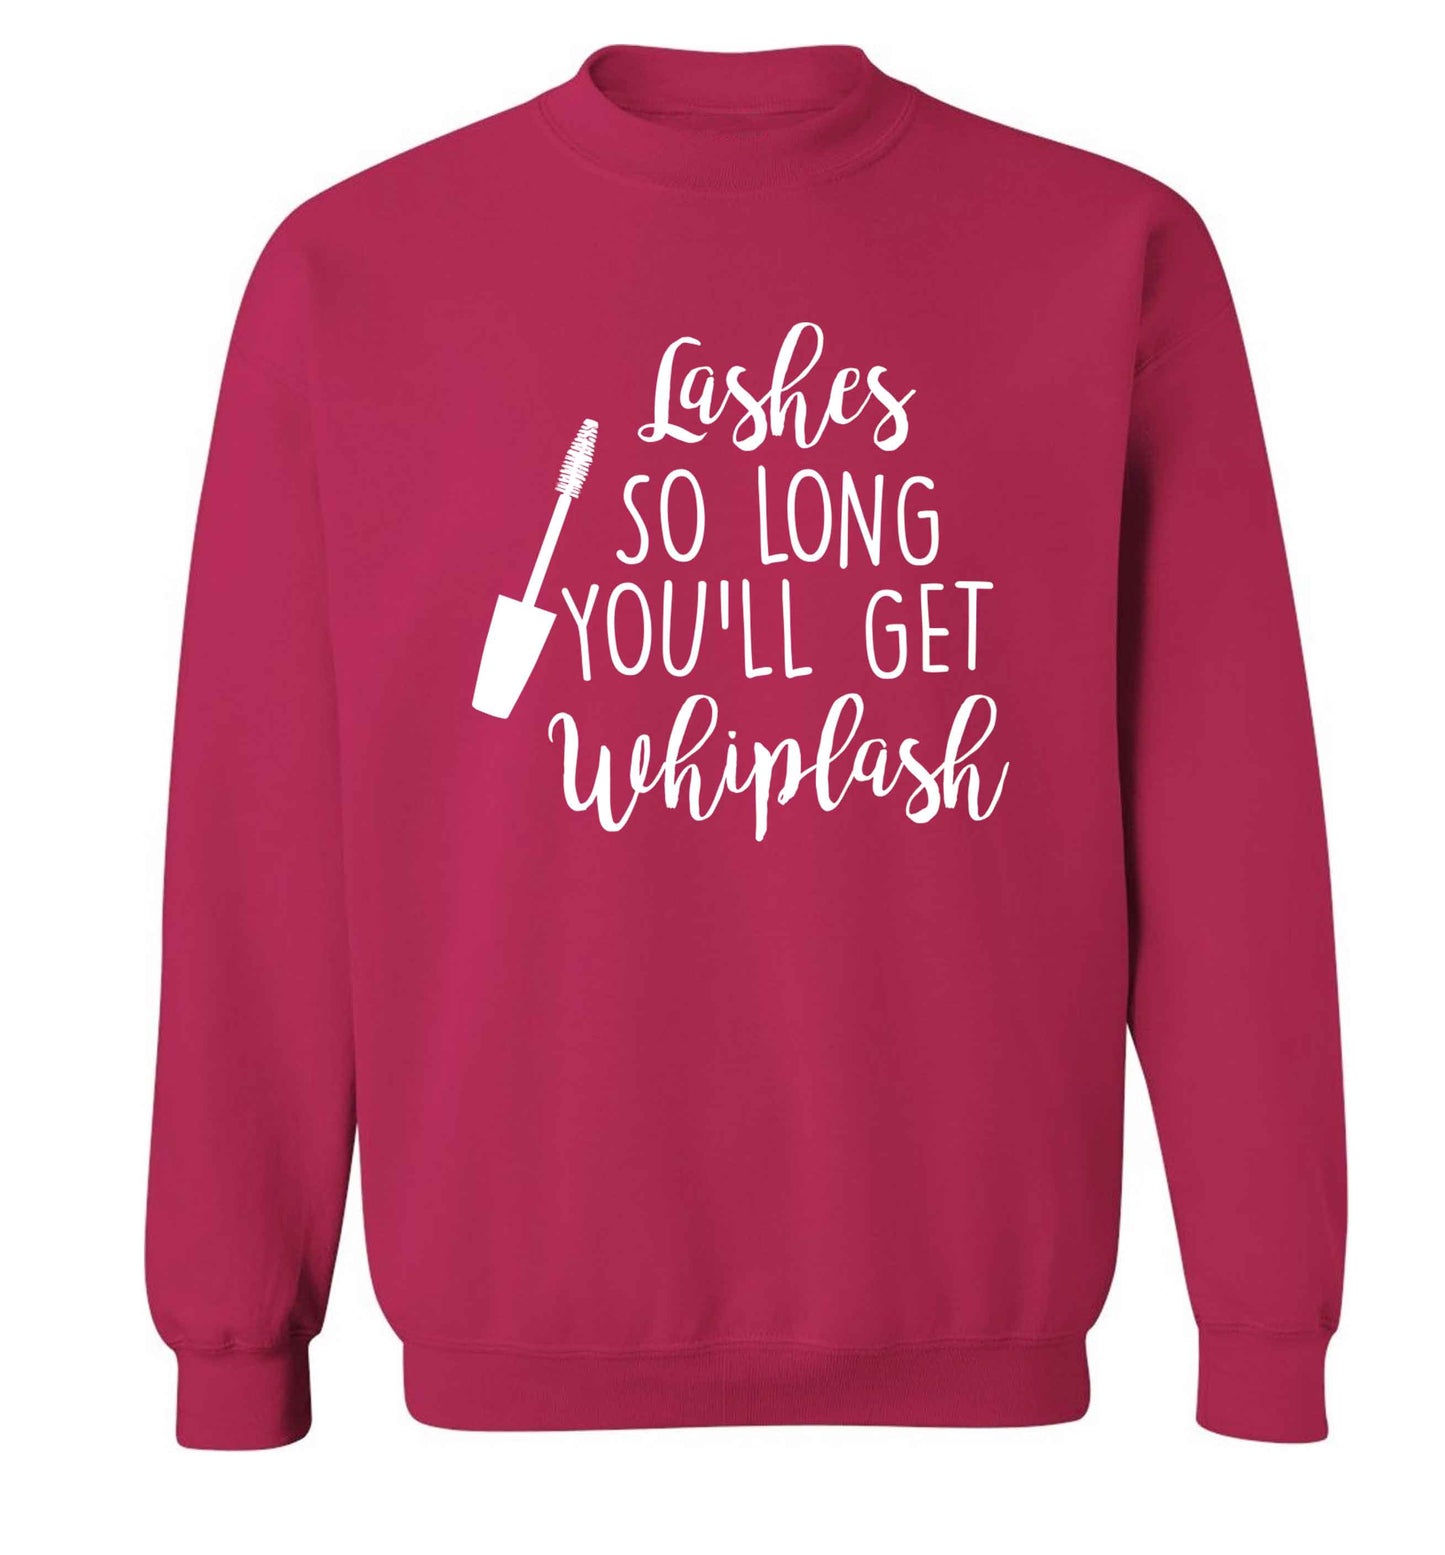 Lashes so long you'll get whiplash Adult's unisex pink Sweater 2XL